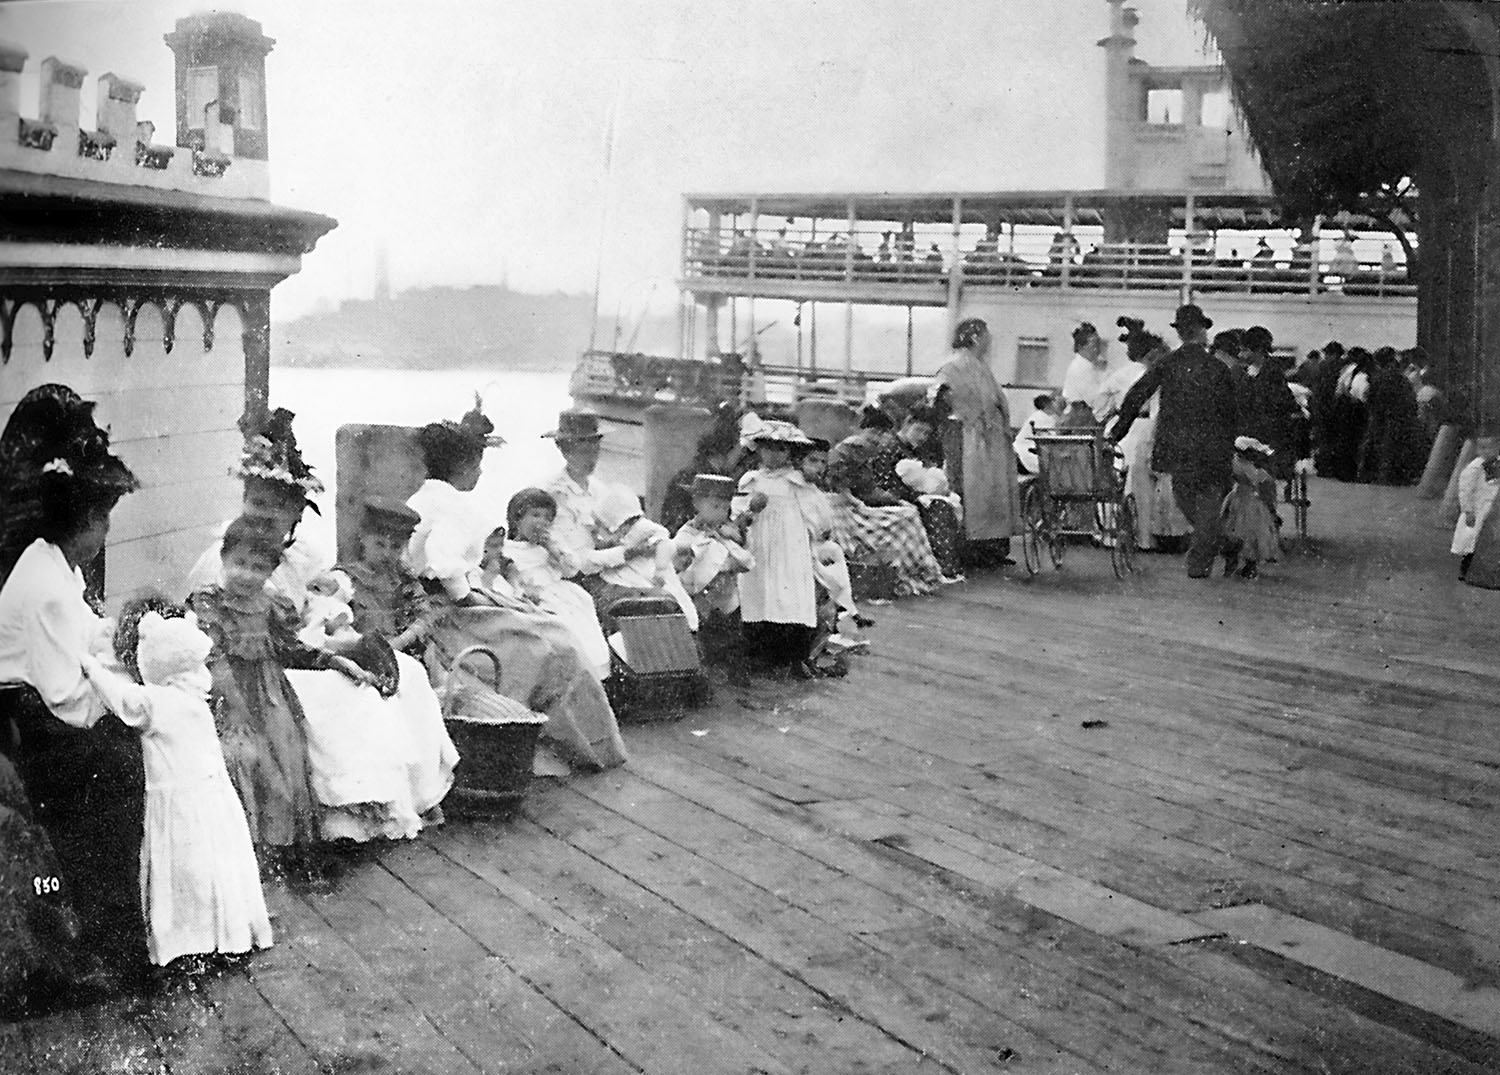 Women and children waiting on dock, to board The Floating Hospital, 1895